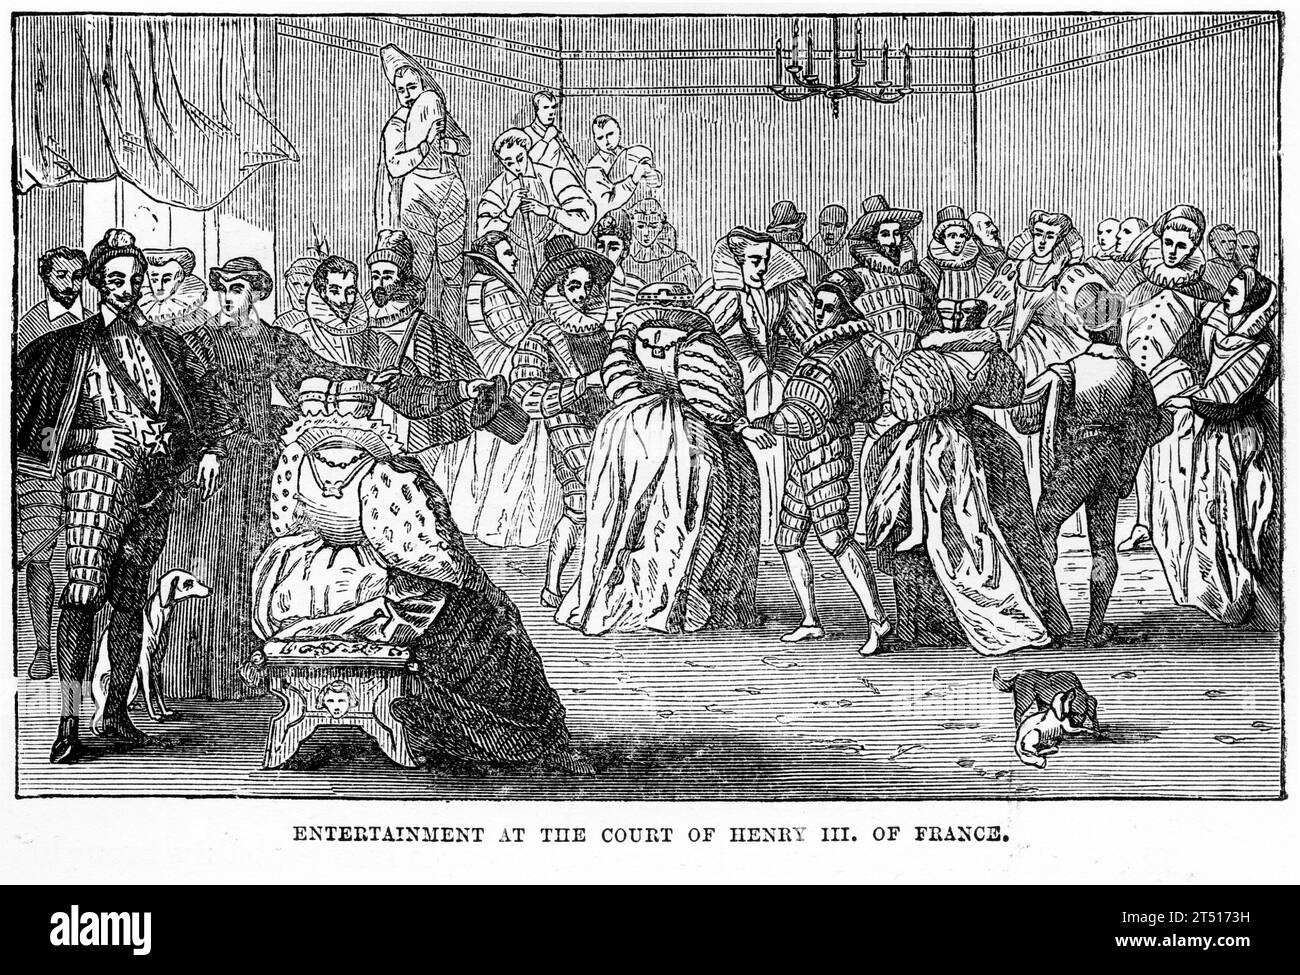 Engraving of the entertainment in the court of Henry III of France published  1887 Stock Photo